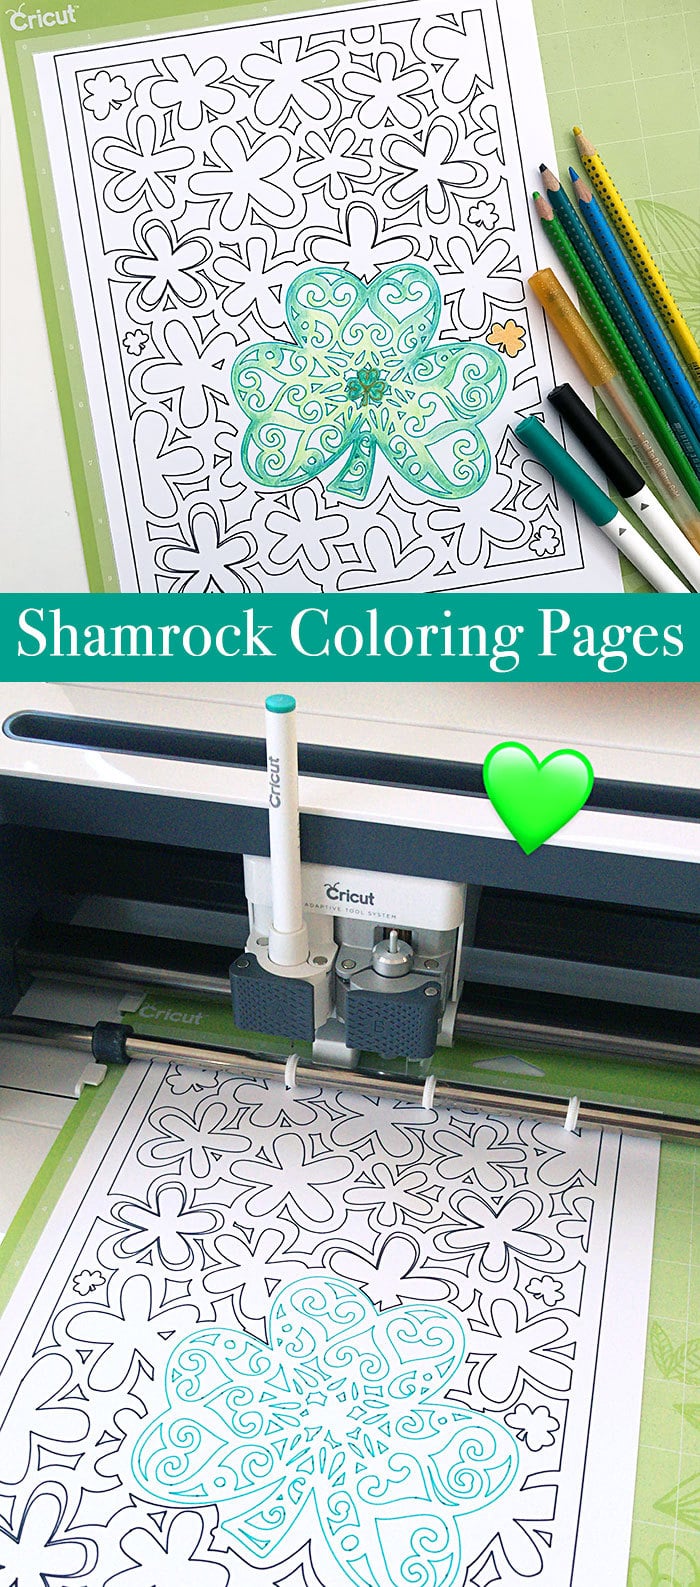 Create your own Shamrock Coloring Page with Your Cricut - designed by Jen Goode